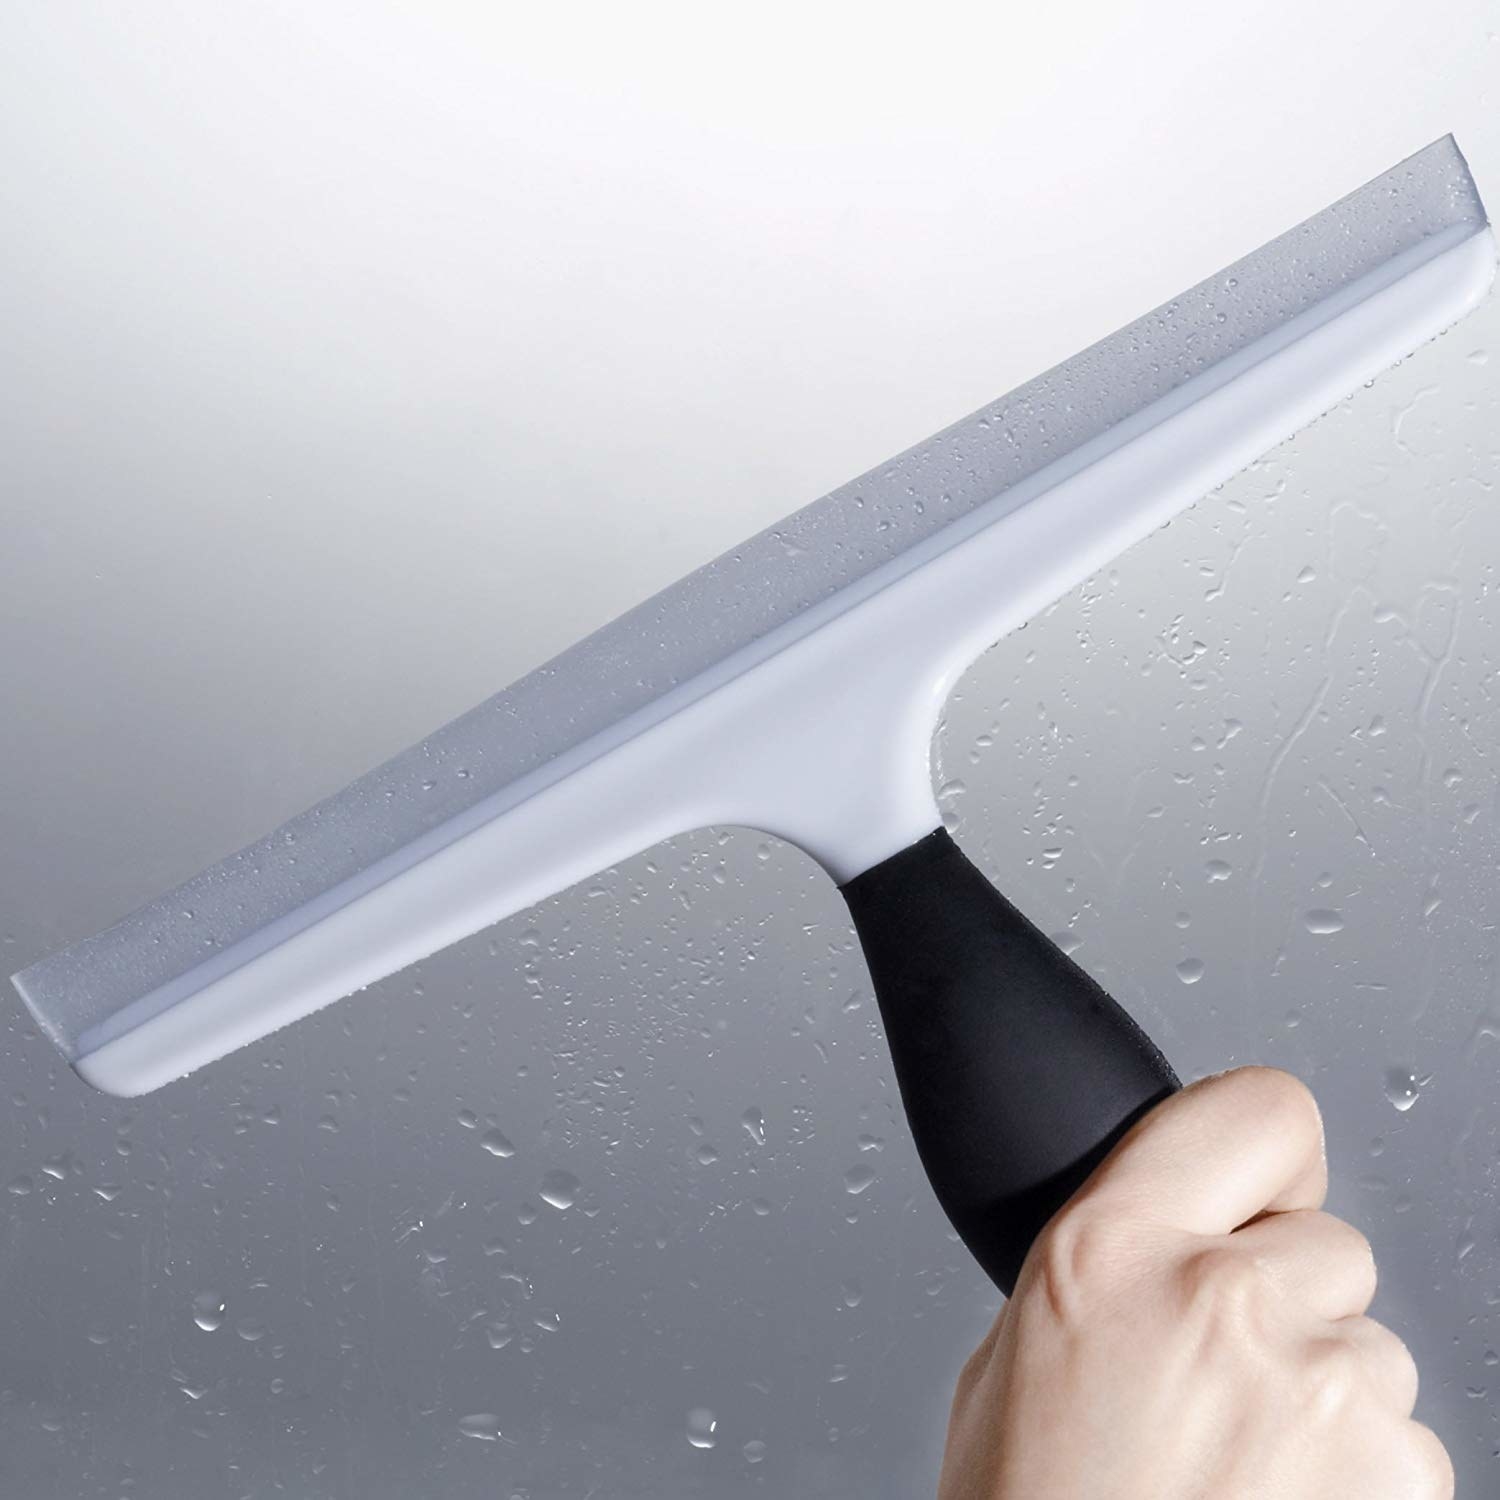 the squeegee